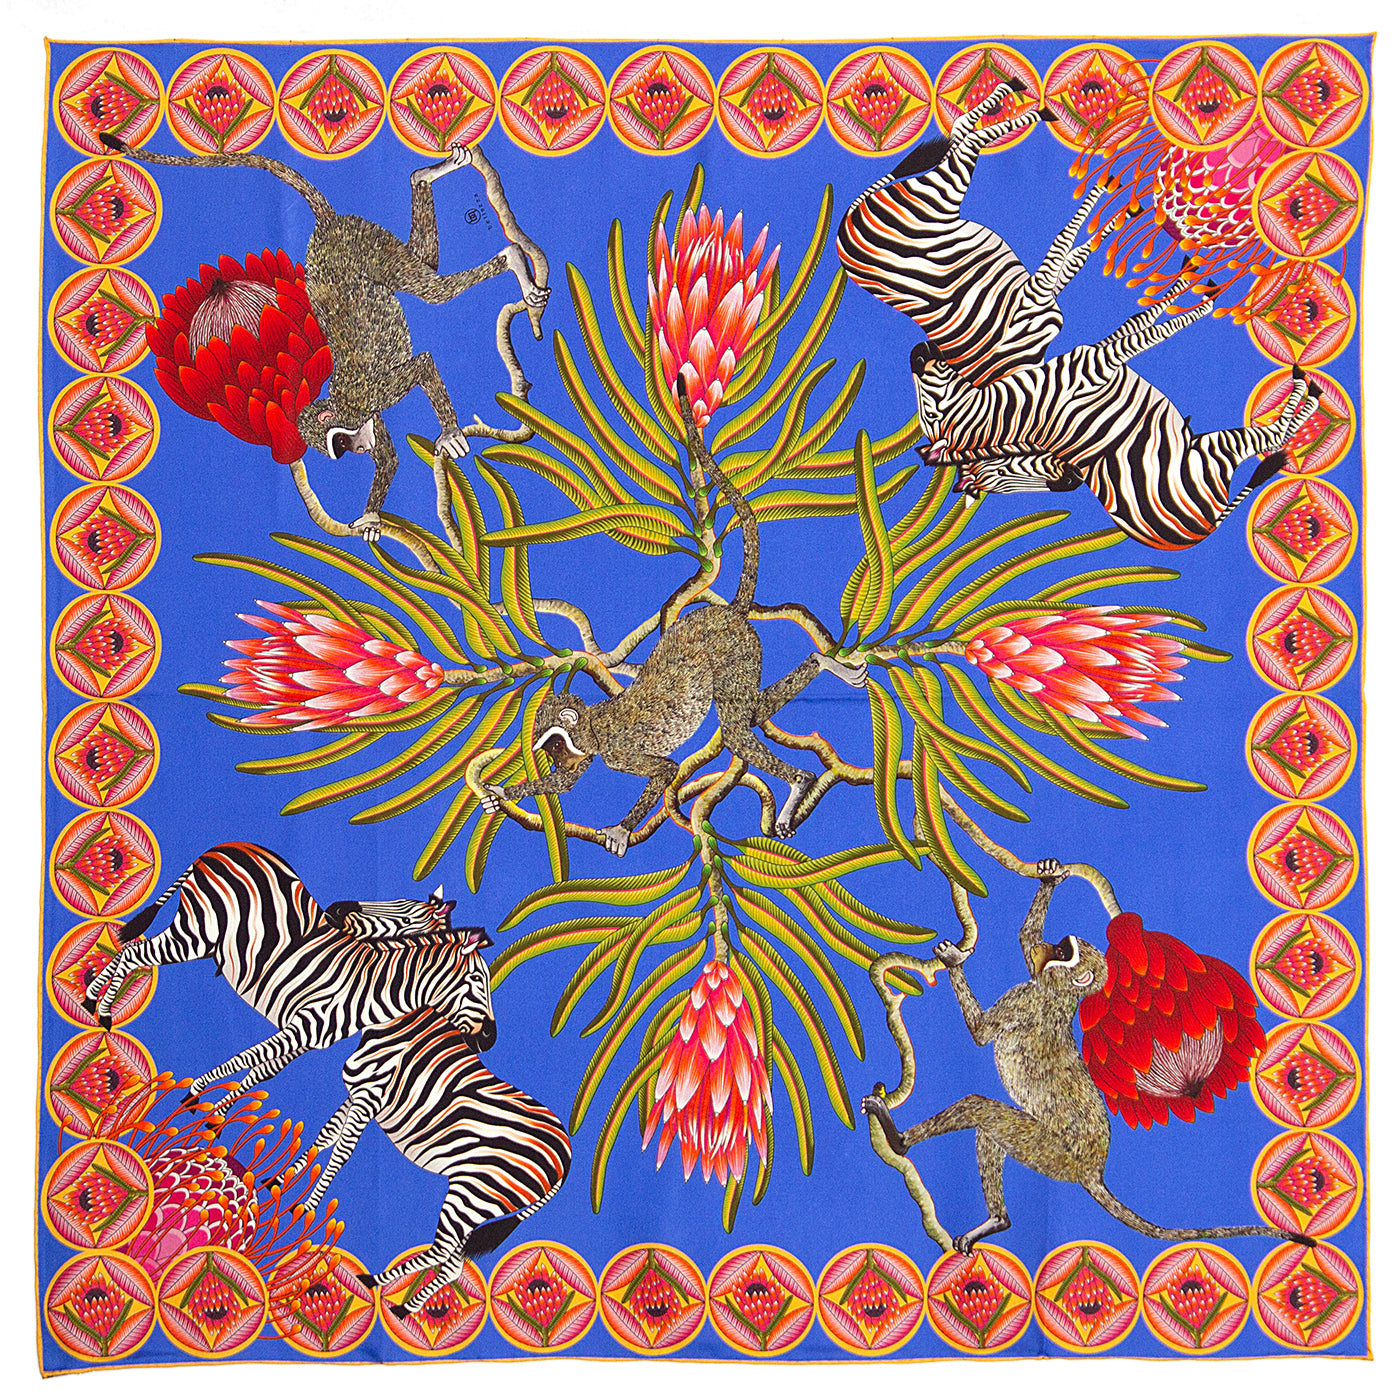 Blue and light blue silk scarf with Zebras Monkies and Protea flowers